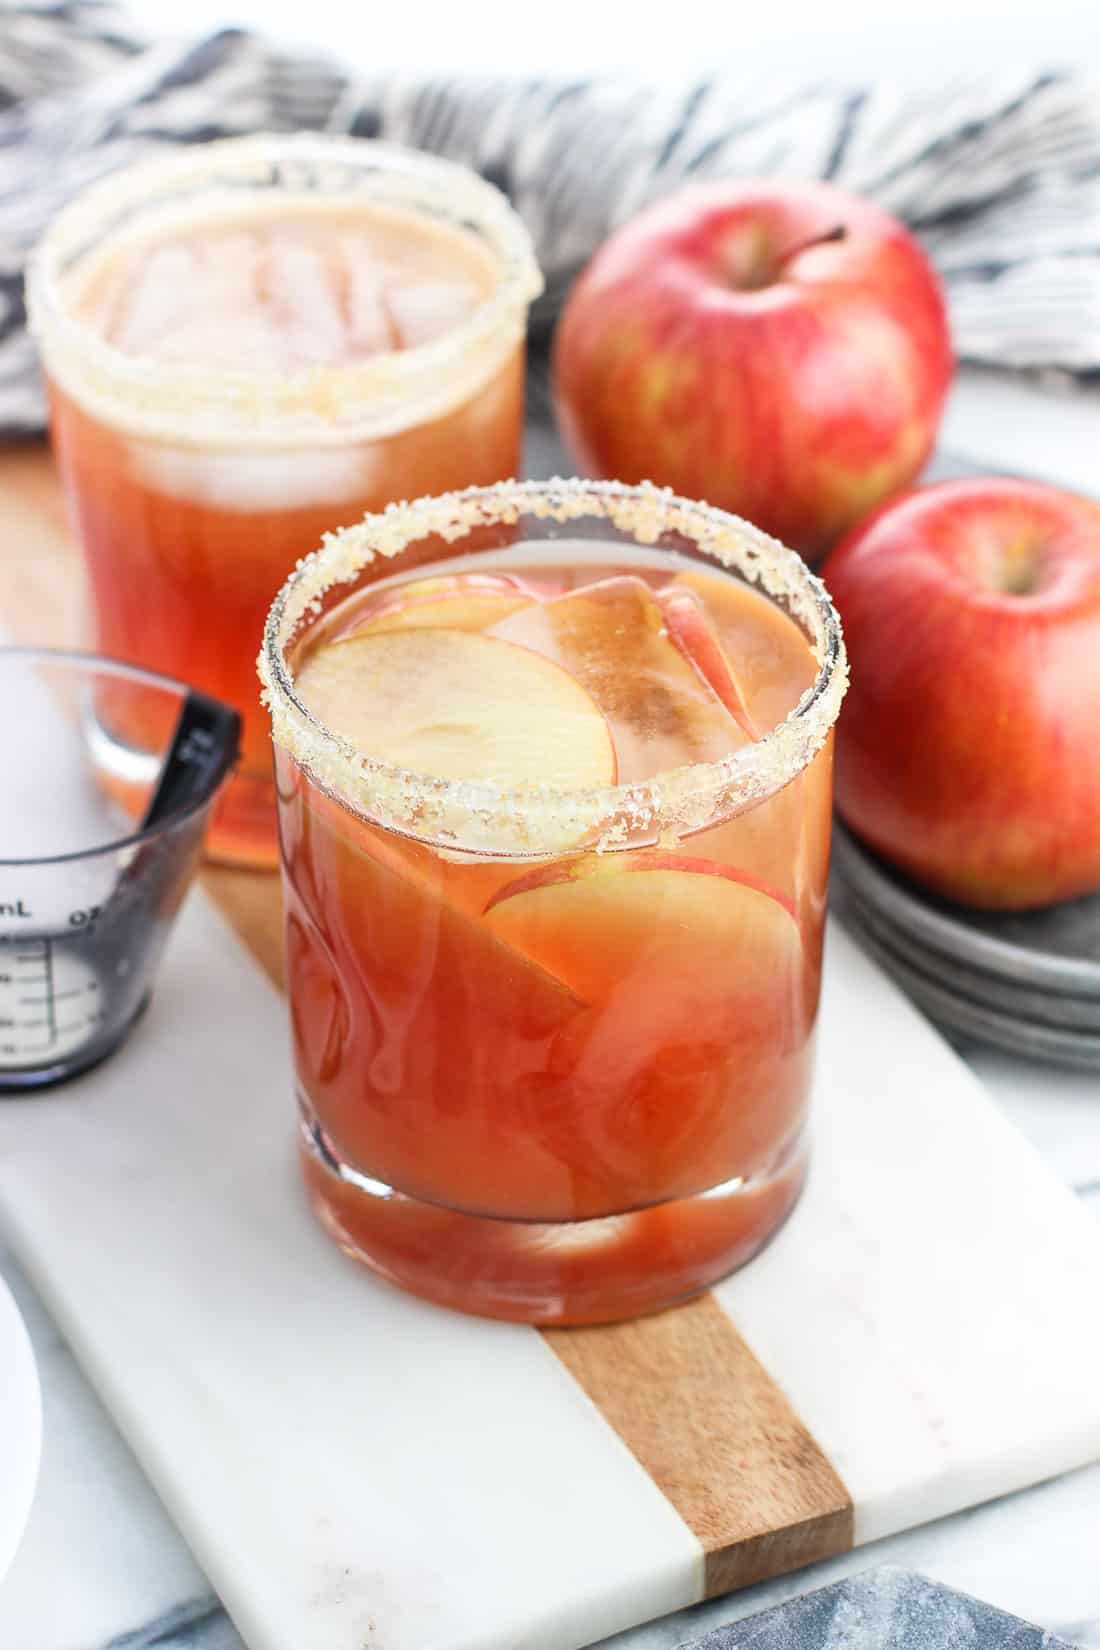 A cranberry apple margarita garnished with a golden sugar rim and apple slices